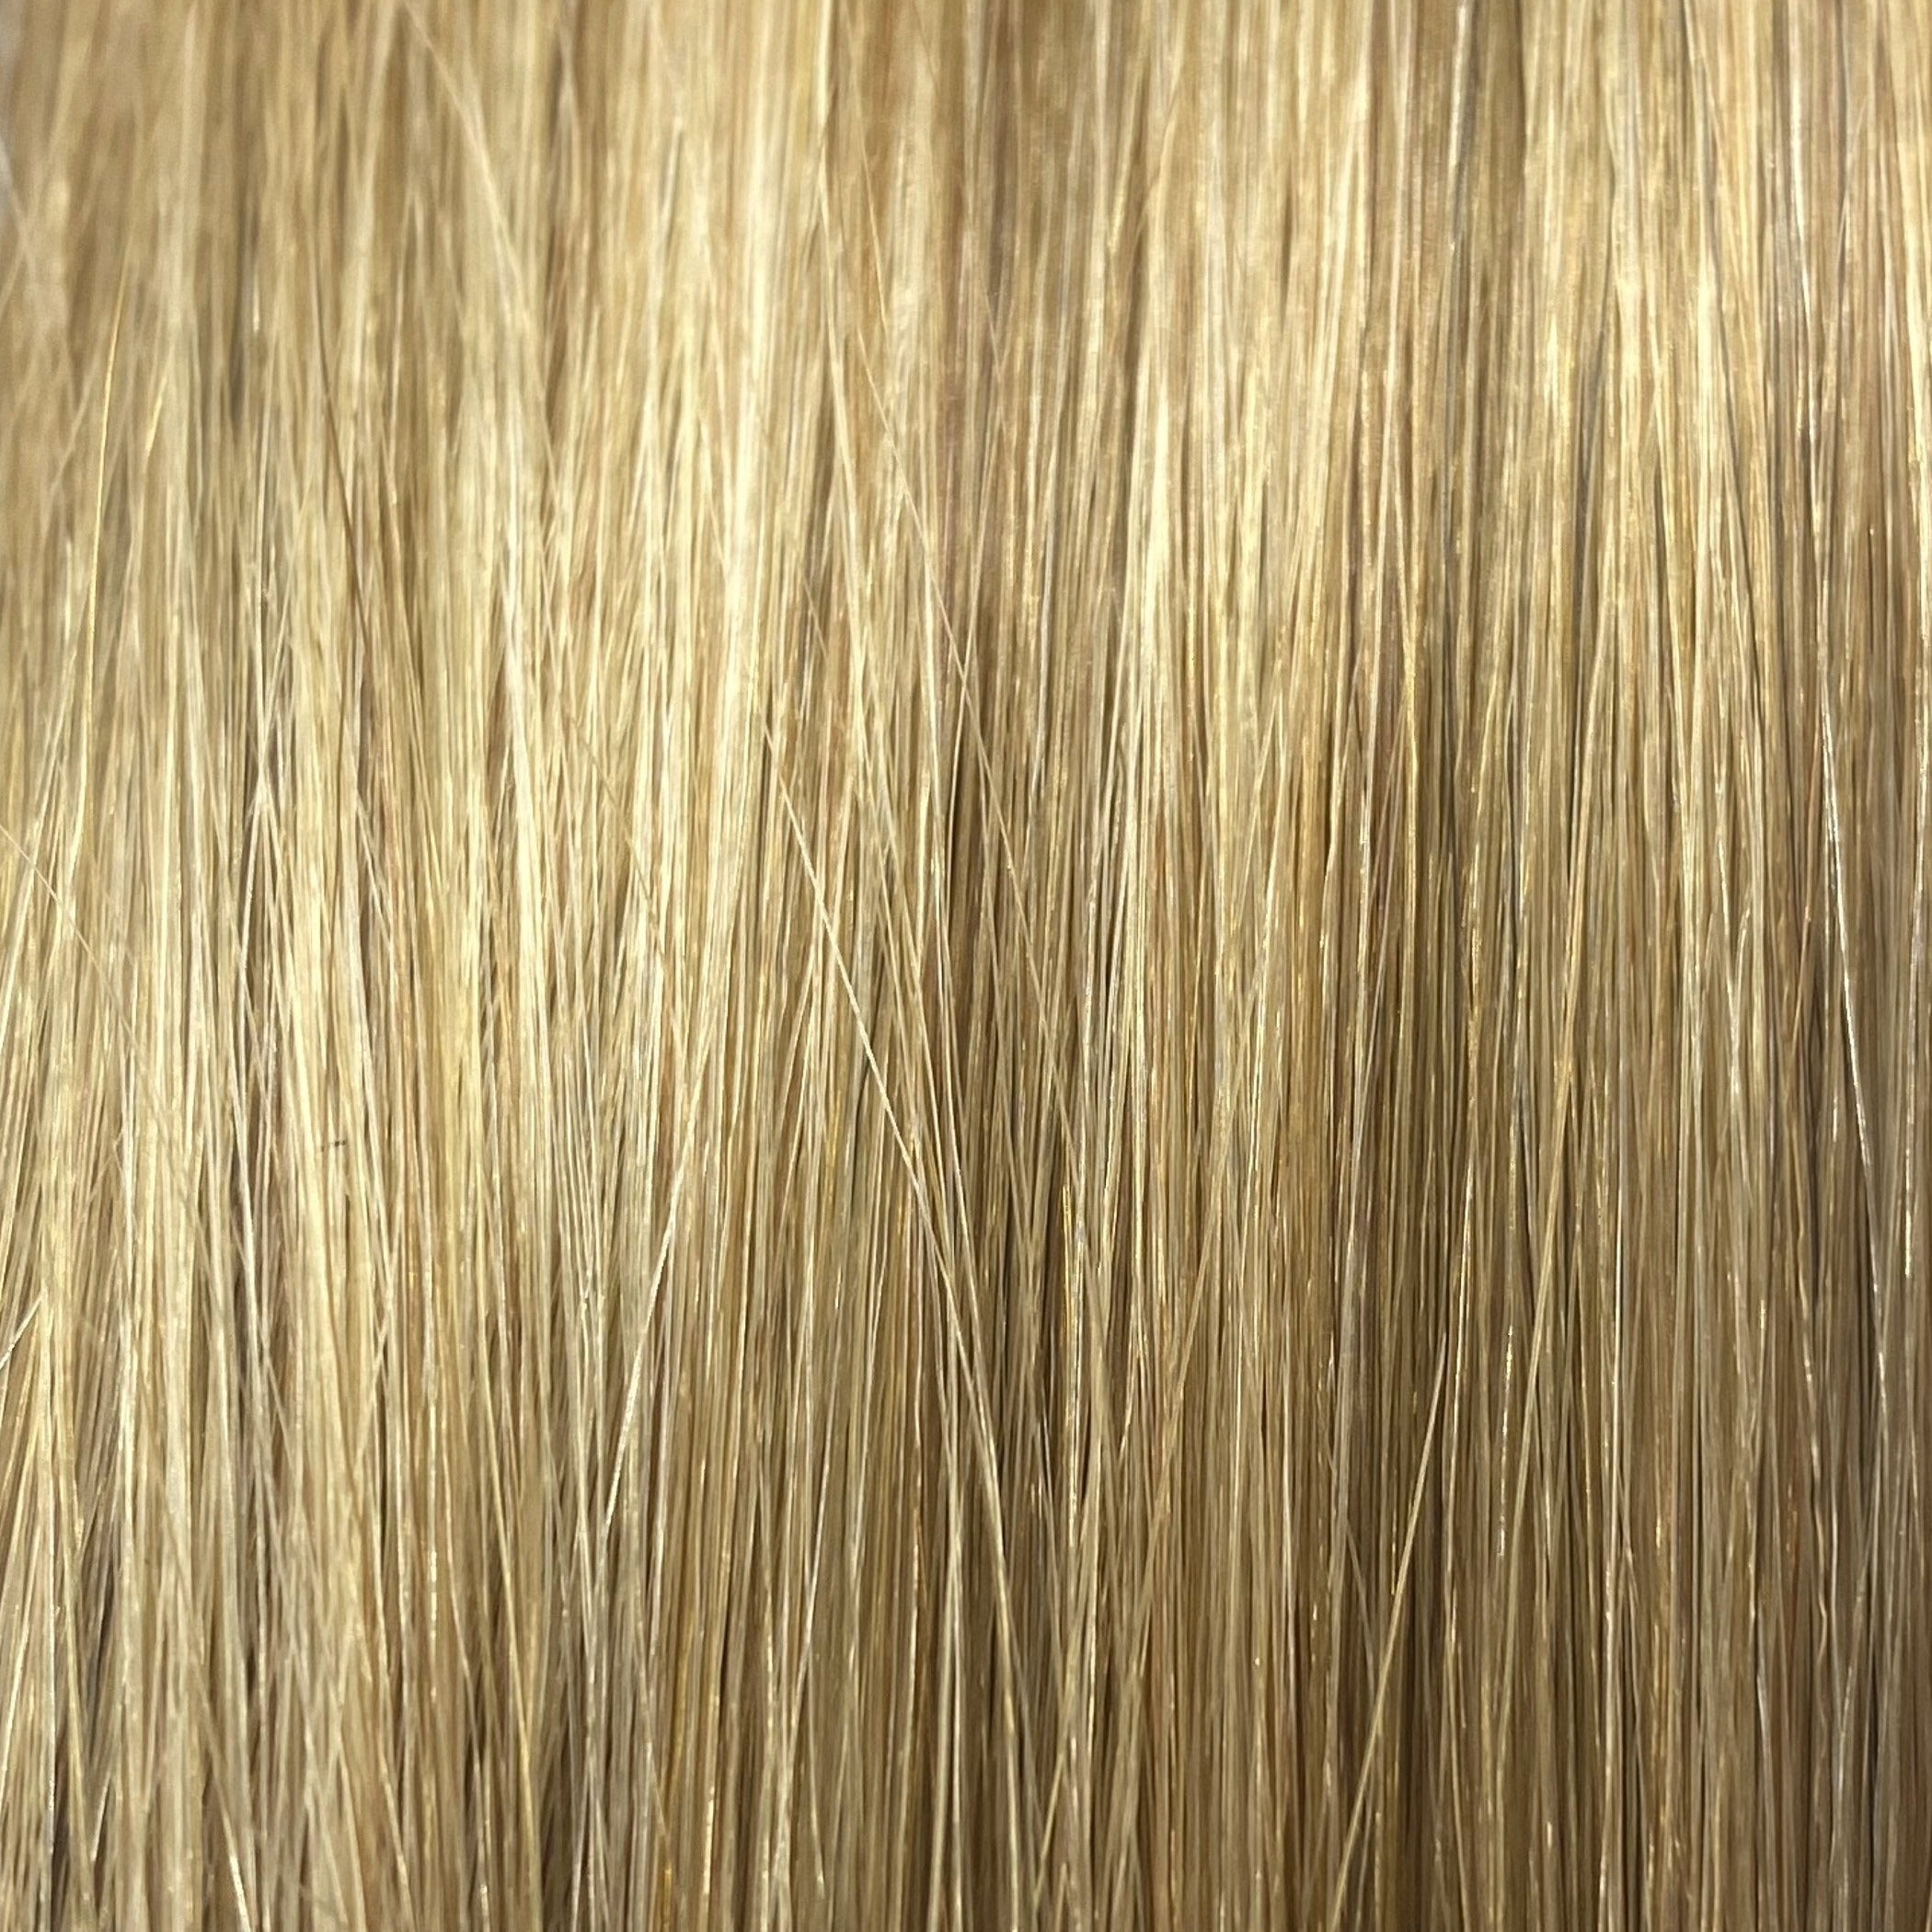 FUSION HIGHLIGHT #12/DB2 LIGHT/COPPER GOLDEN BLONDE 40CM/ 16 INCHES  - 17.5 GRAMS